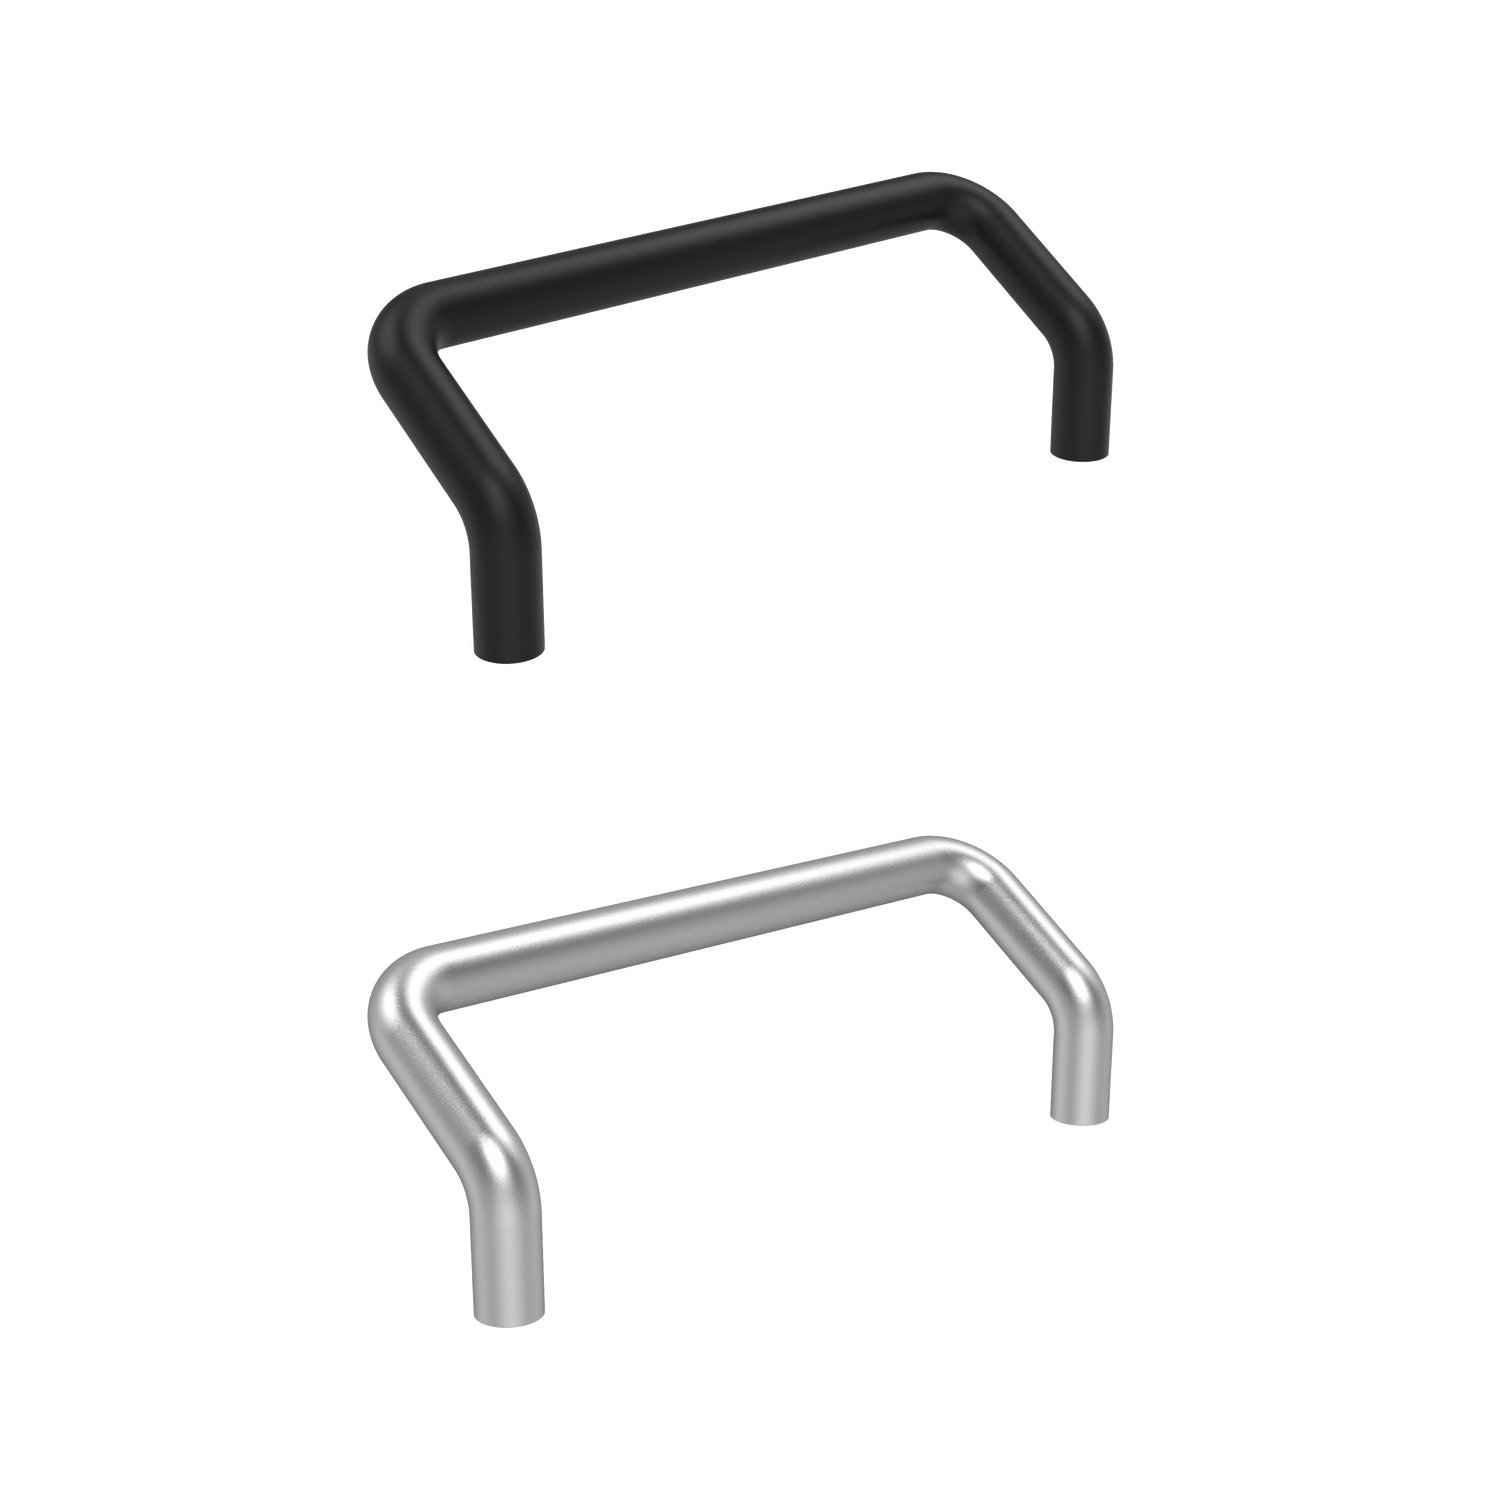 Pull Handles - Offset These aluminium offset pull handles have a round bar with a finish in natural or black colour. Minimum stress resistance of 500N.